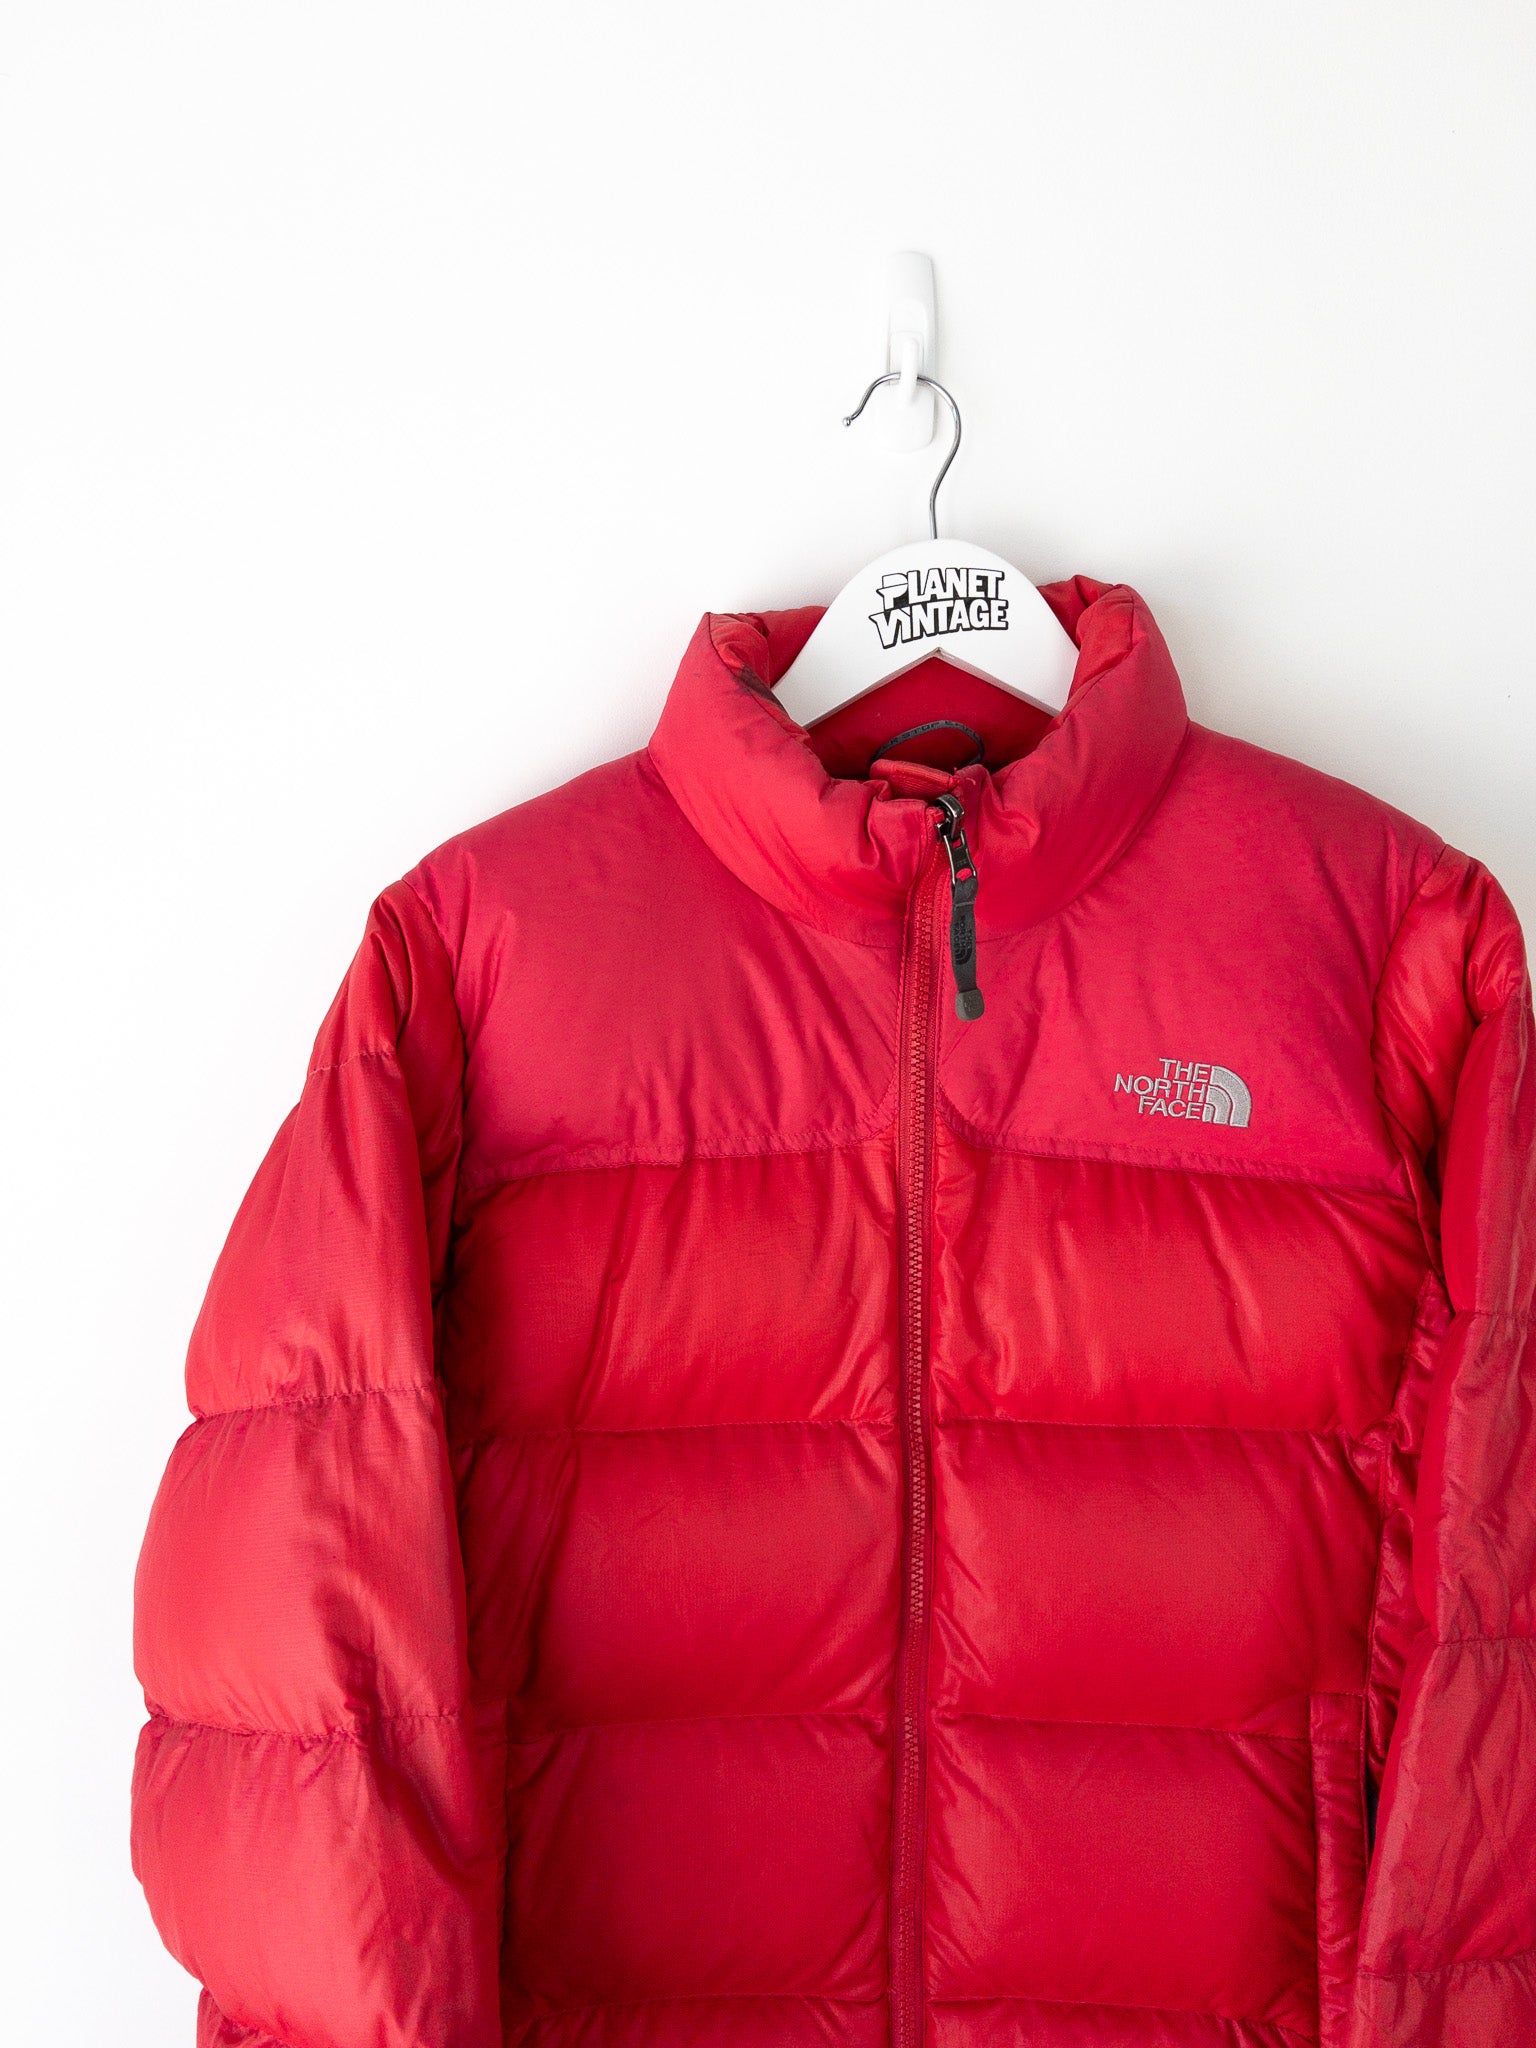 Vintage The North Face 700 Puffer Jacket (S)